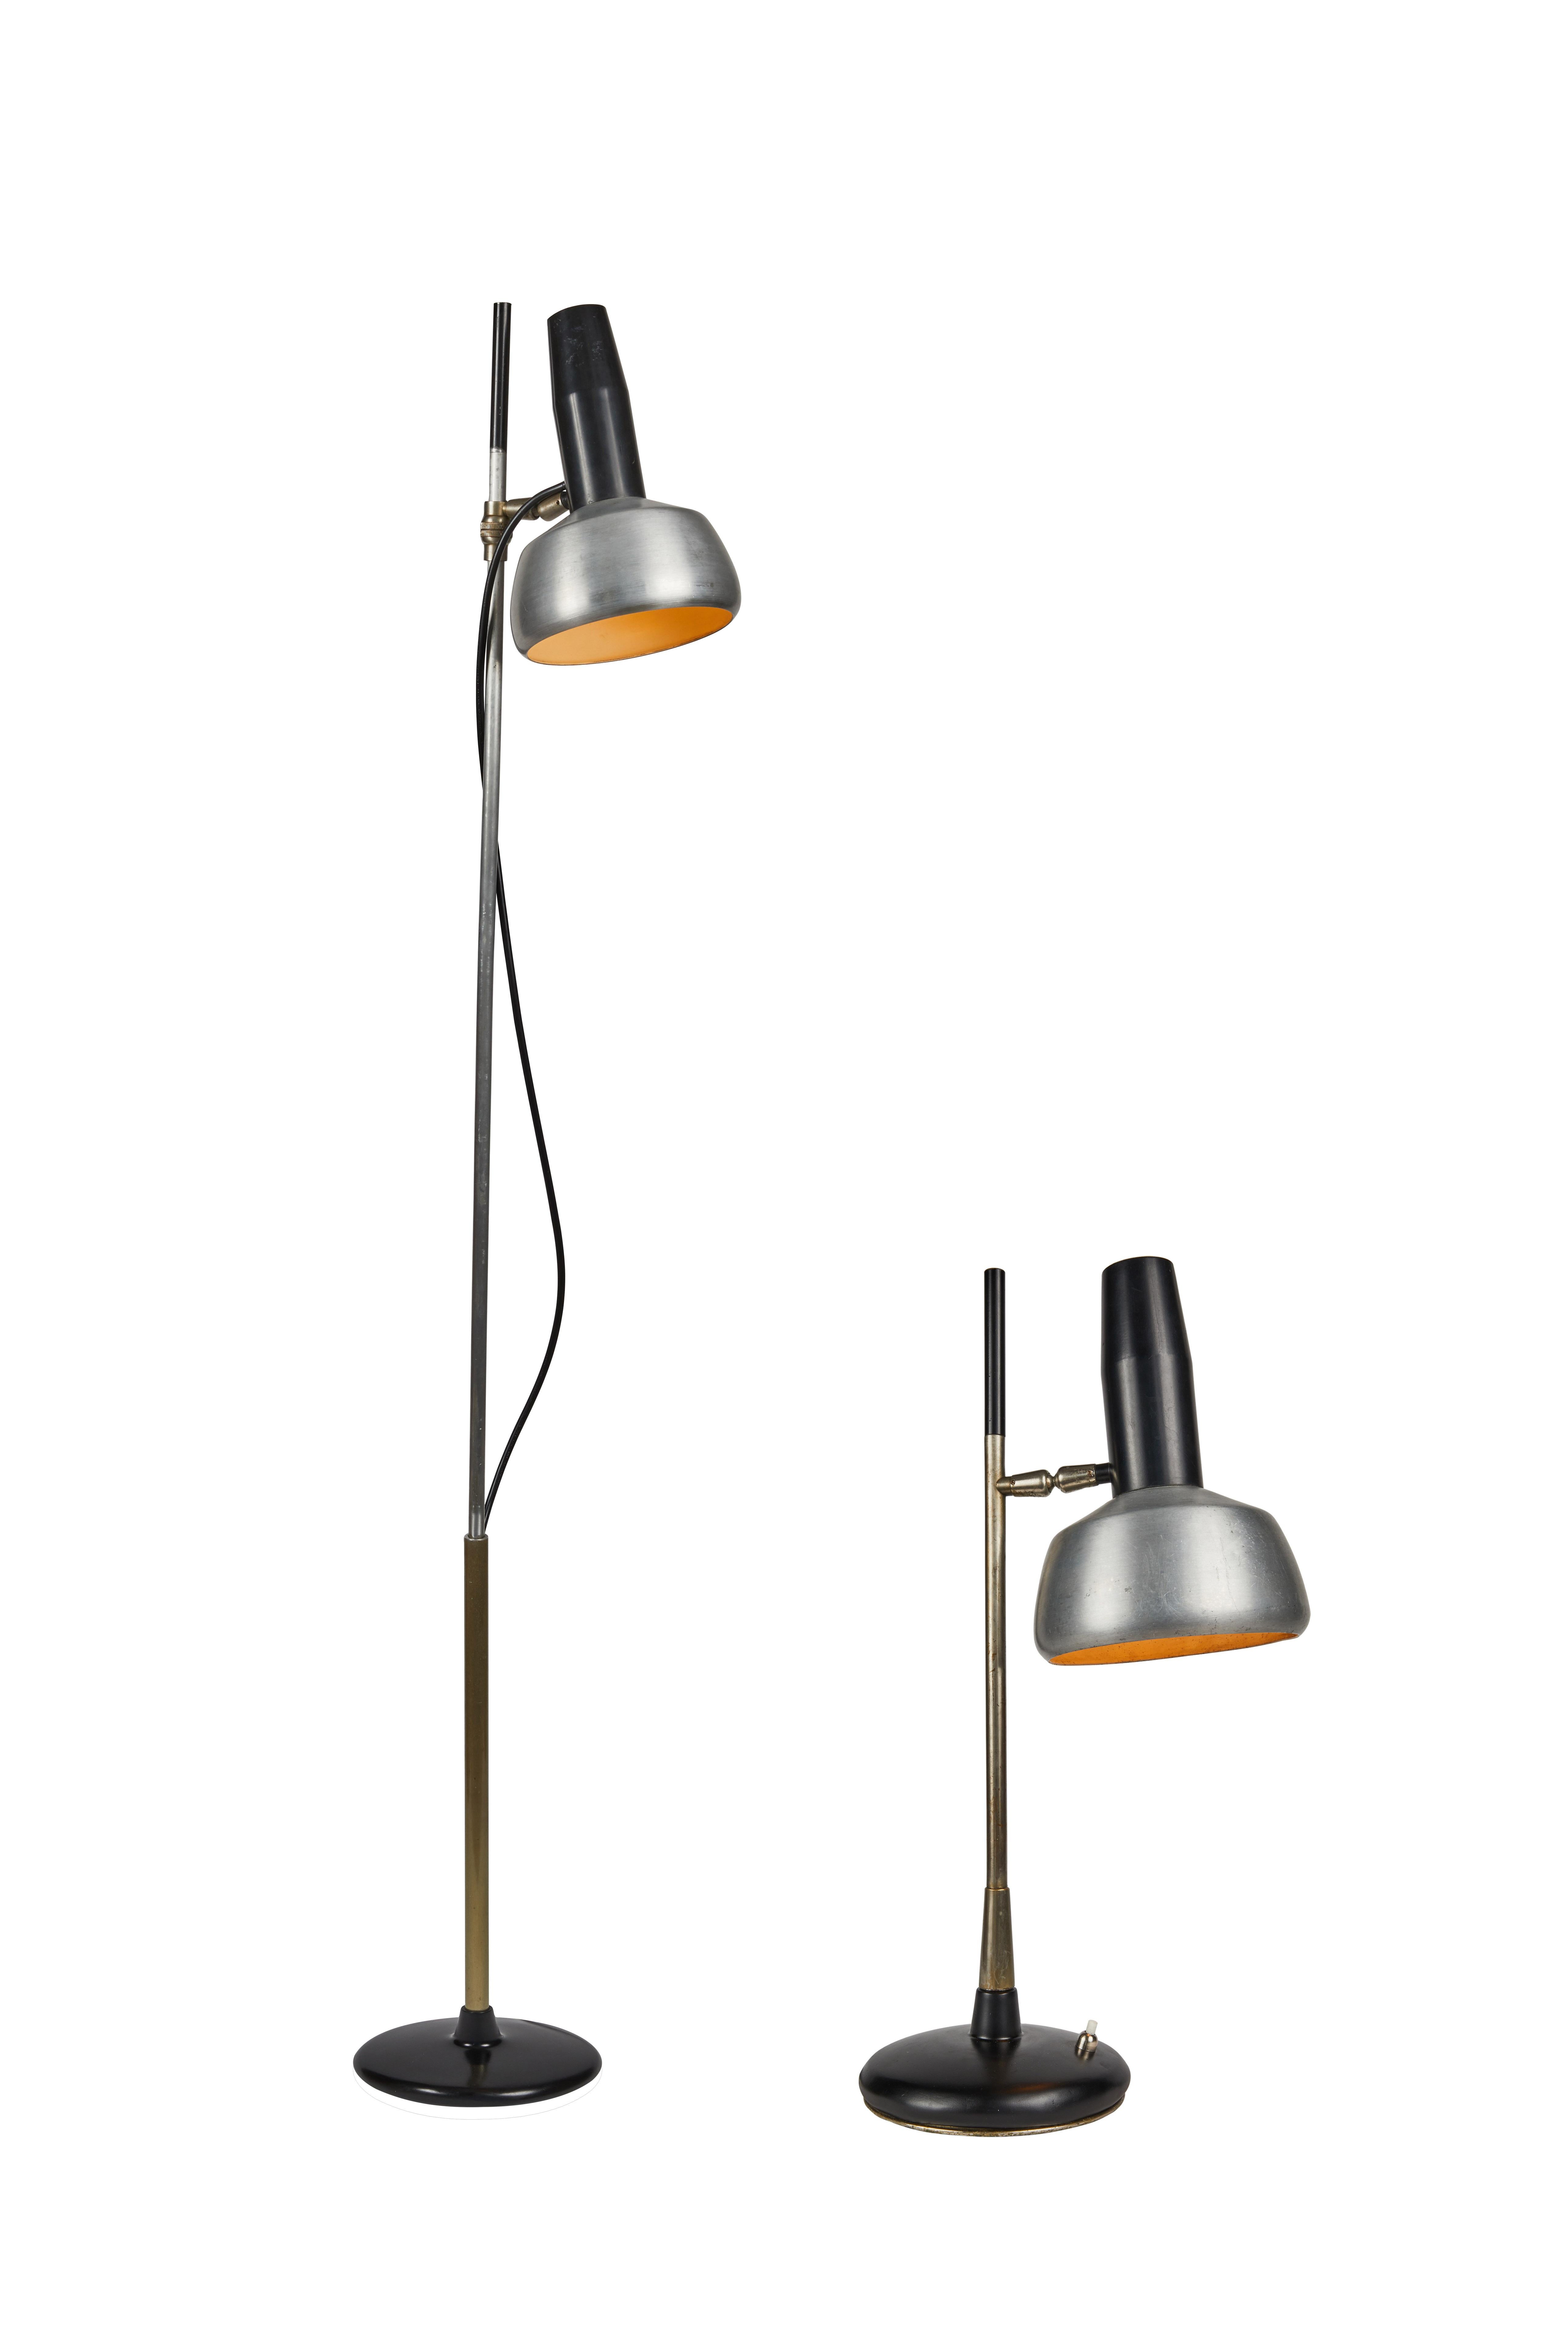 1960s Oscar Torlasco floor lamp for Lumi. Executed in painted metal, chrome and aluminum. Retains original manufacturers label. Lumi was one of the most innovative lighting design companies in Italy during the midcentury era. Their designs have been